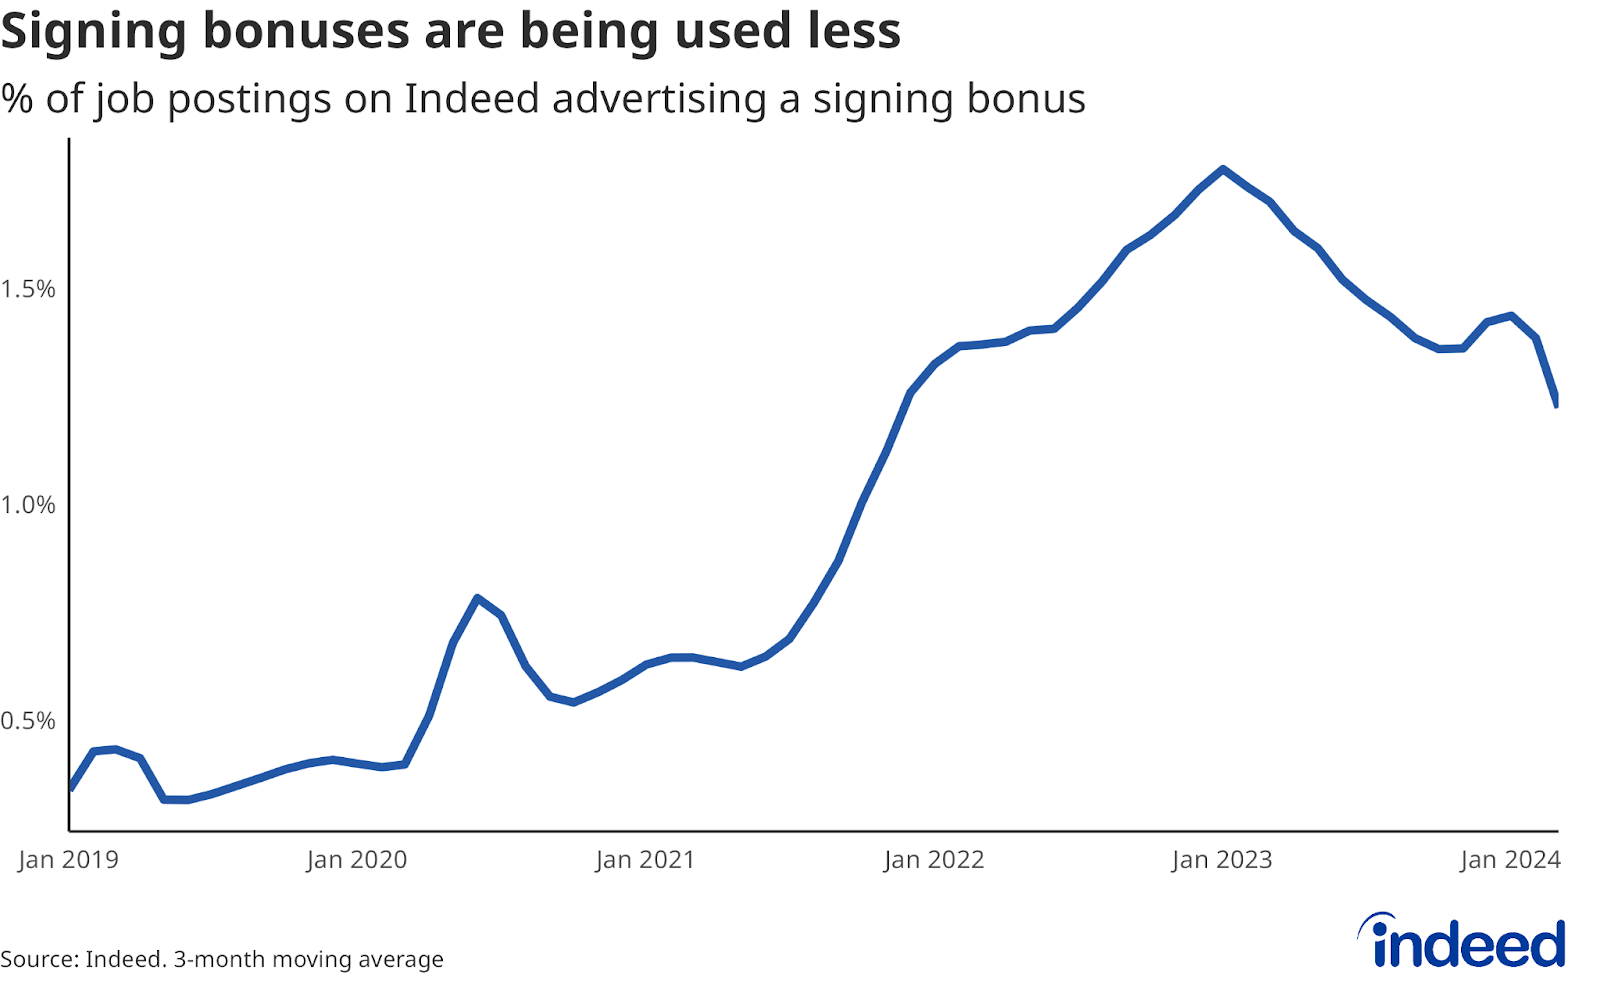 Line chart titled “Signing bonuses being used less” showing the share of job postings mentioning signing bonuses from 2019 to 2024. The share peaked at 1.8% in January 2023 but fell to 1.2% in March 2024. 